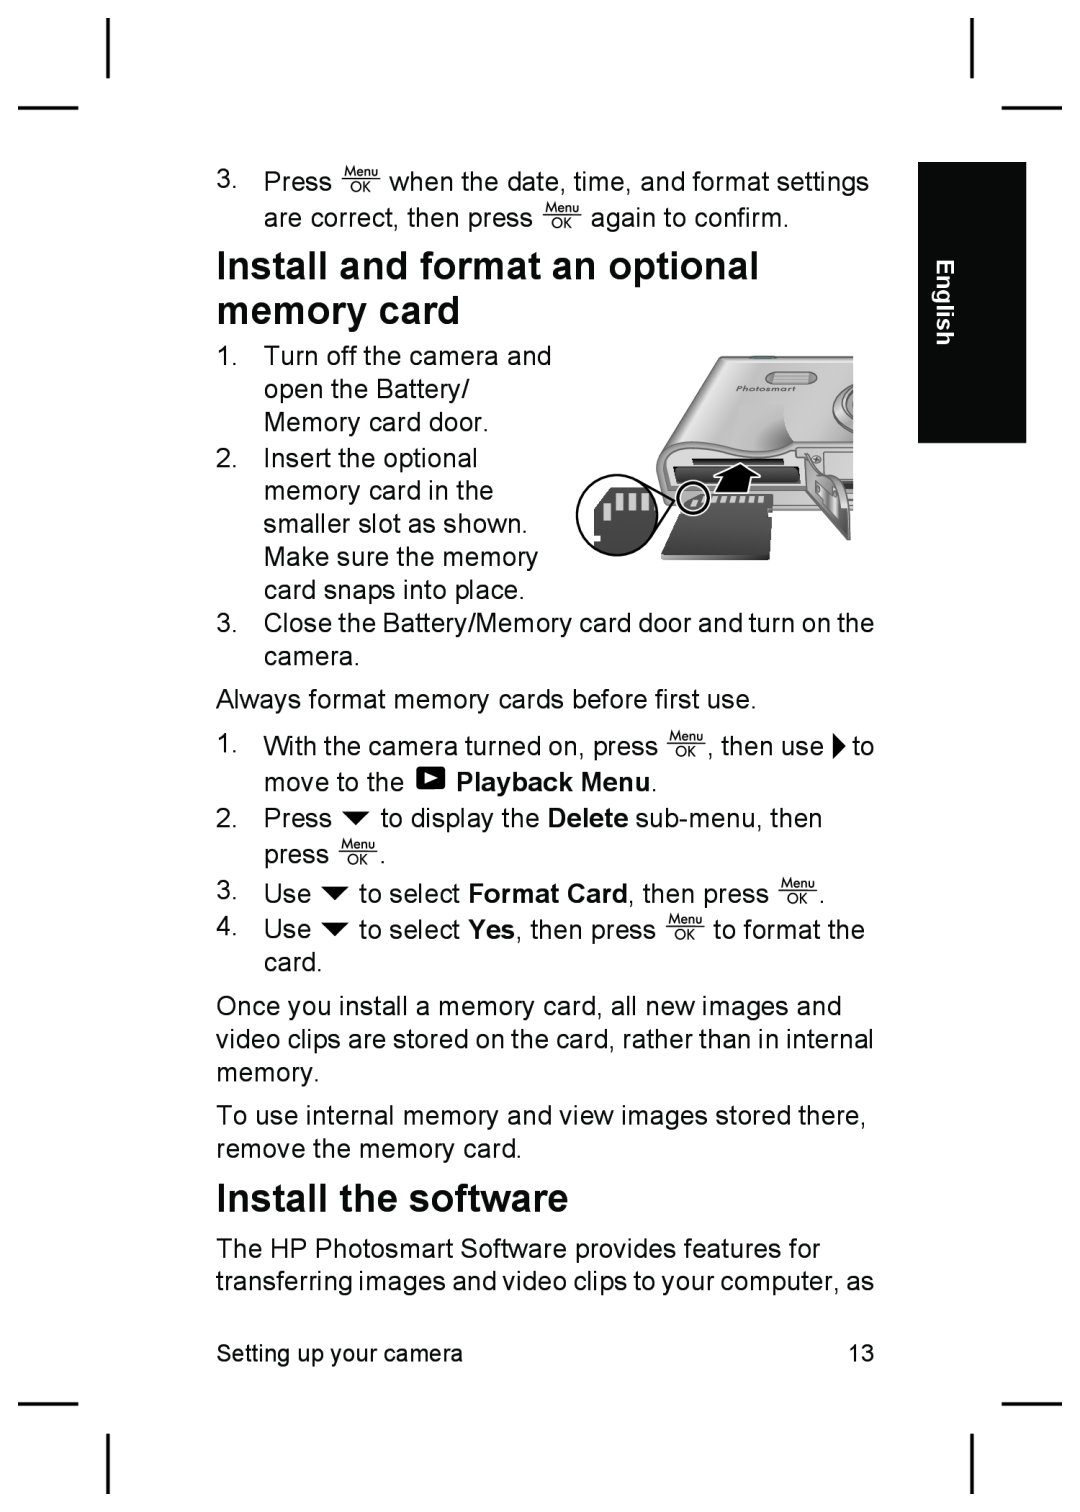 HP R927 manual Install and format an optional memory card, Install the software 